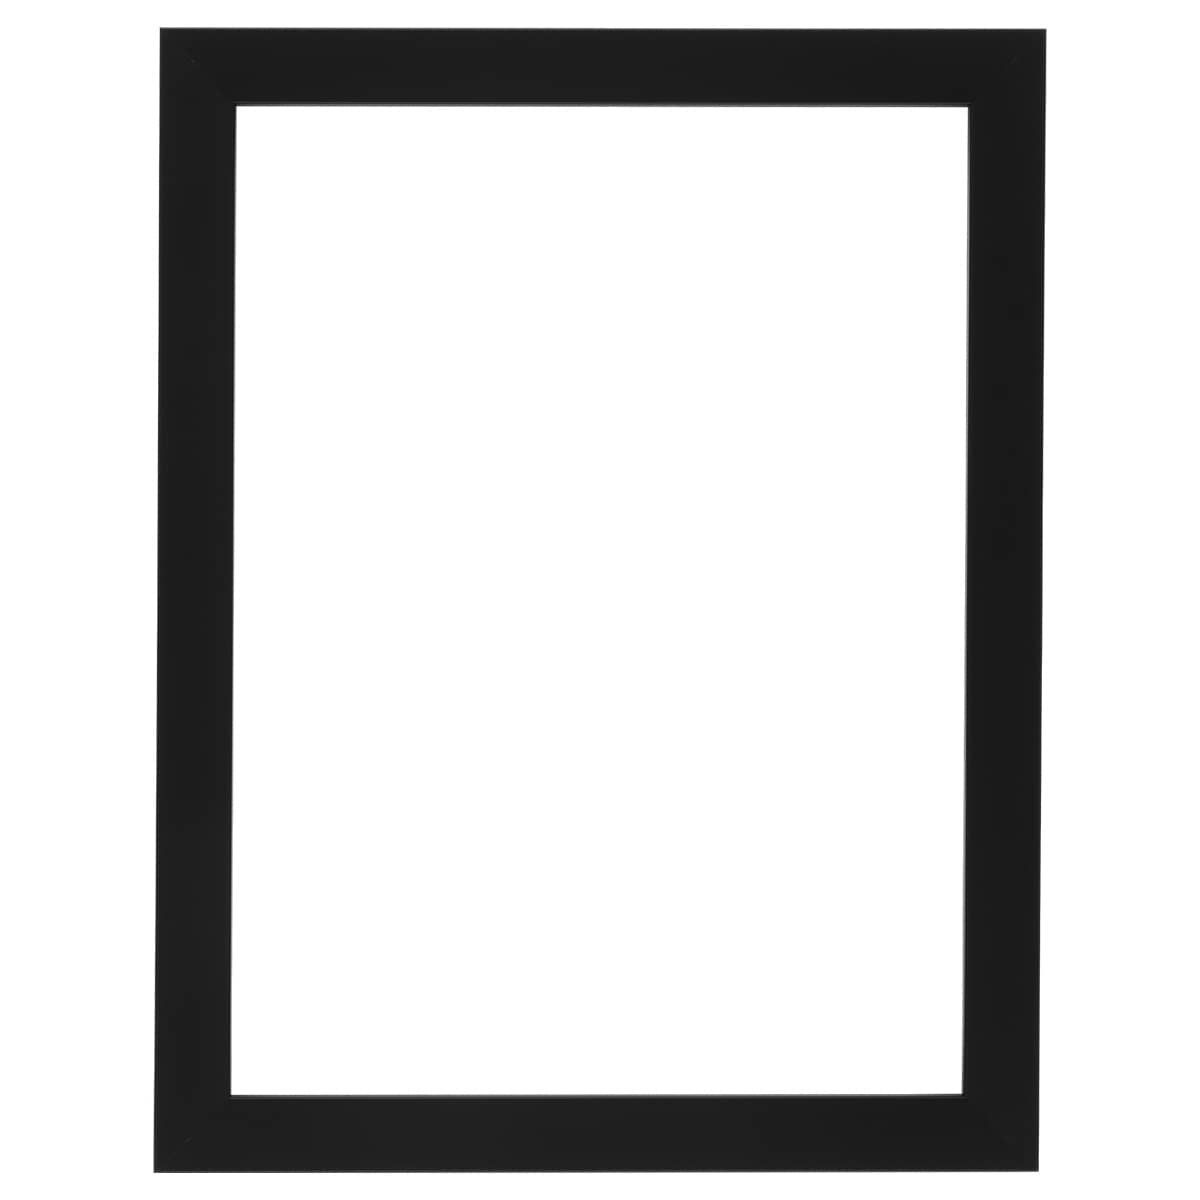 Millbrook Collection - Cap 1.25" Black Frame 16X20 w/ Glass